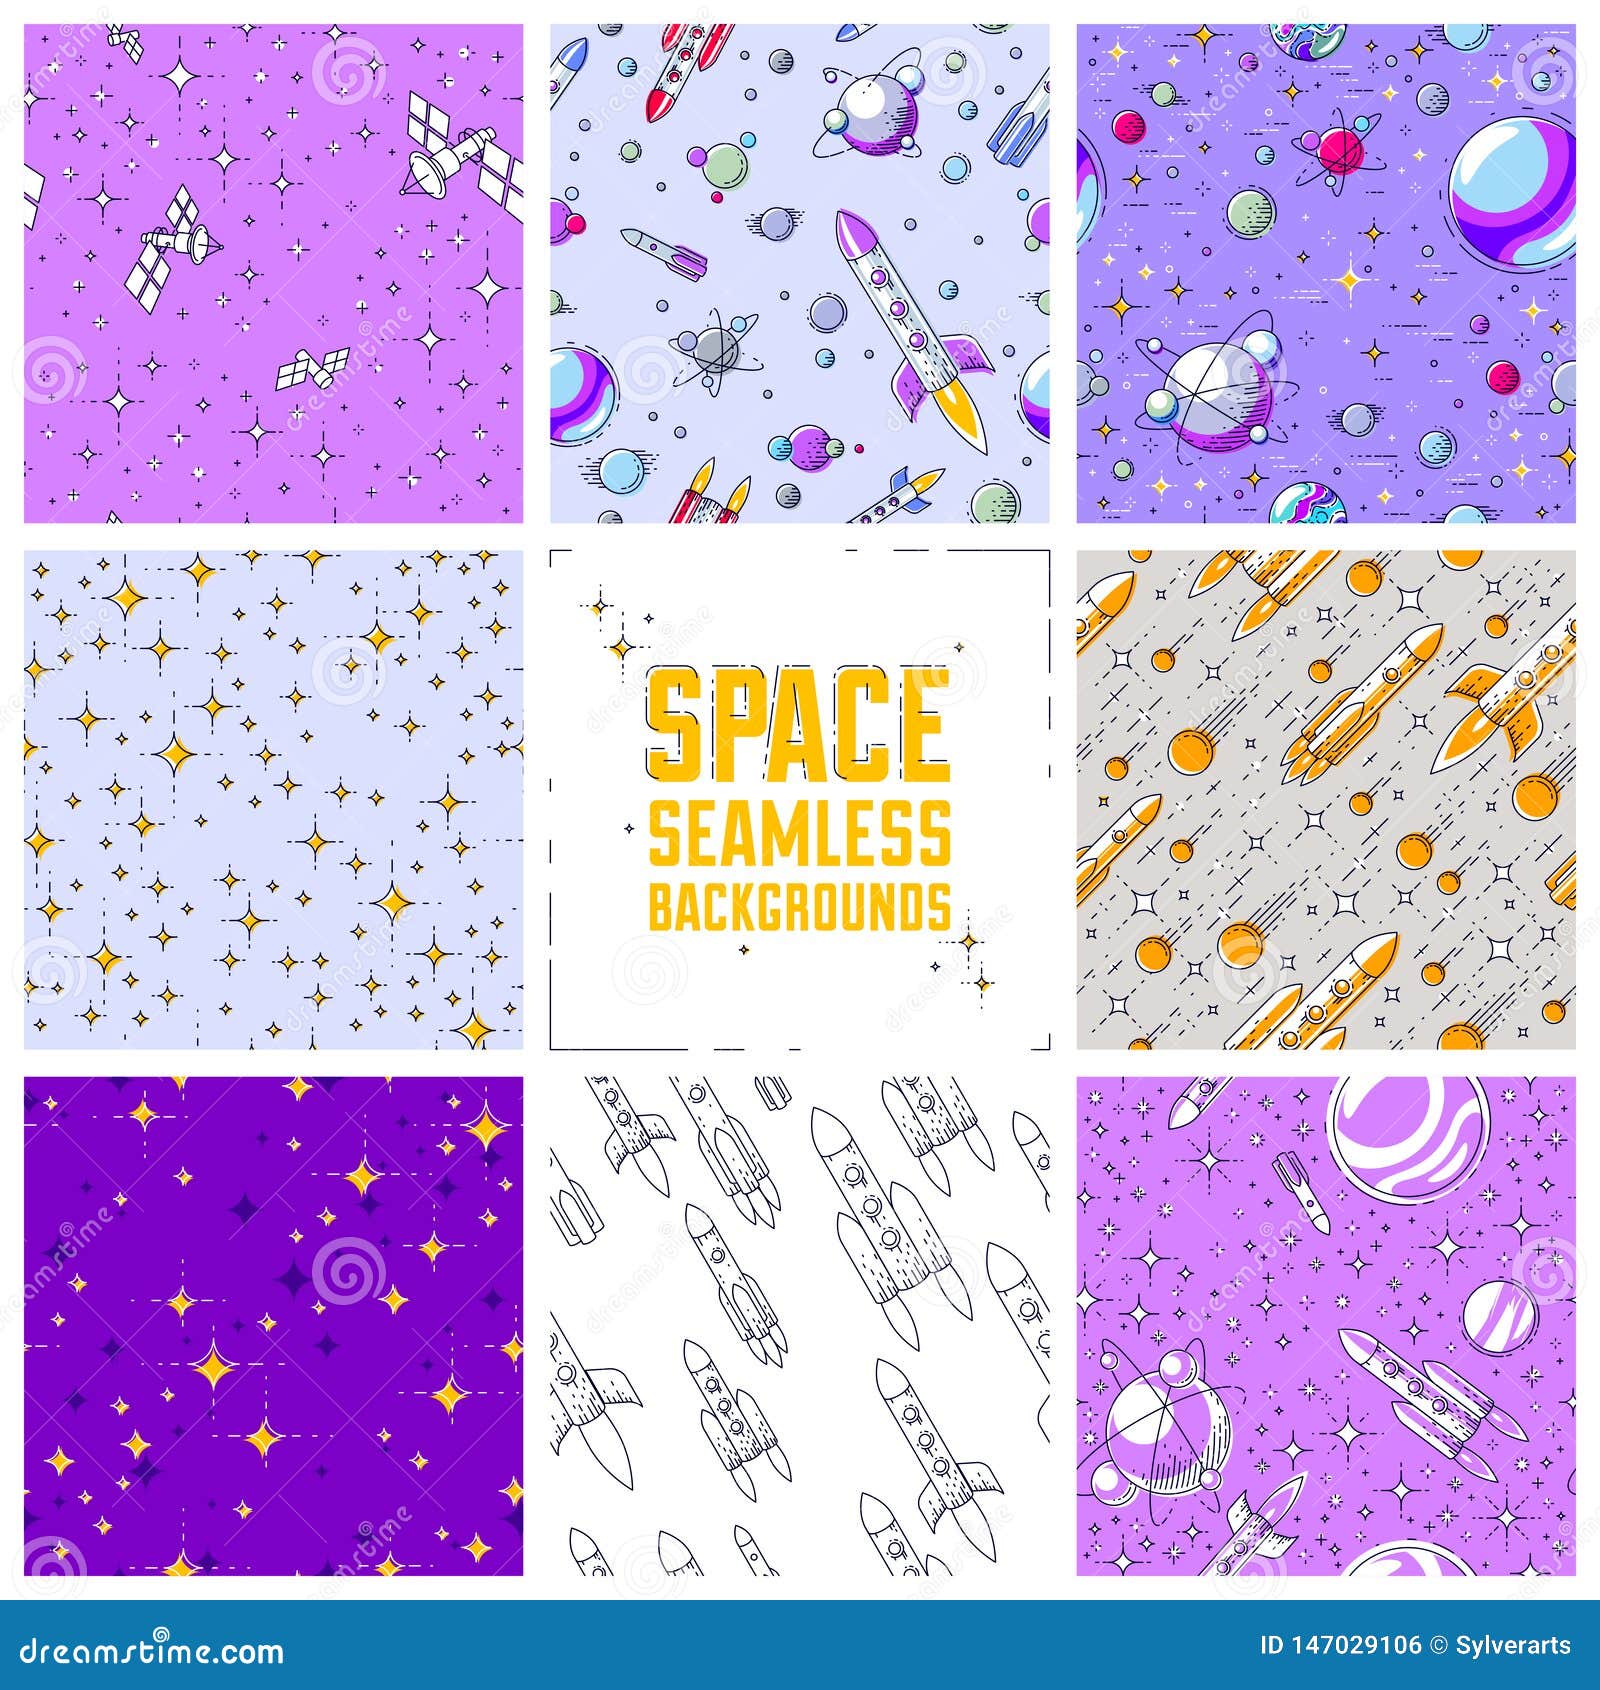 set of seamless space backgrounds with rockets, planets, asteroids, comets, meteors and stars, undiscovered deep cosmos fantastic